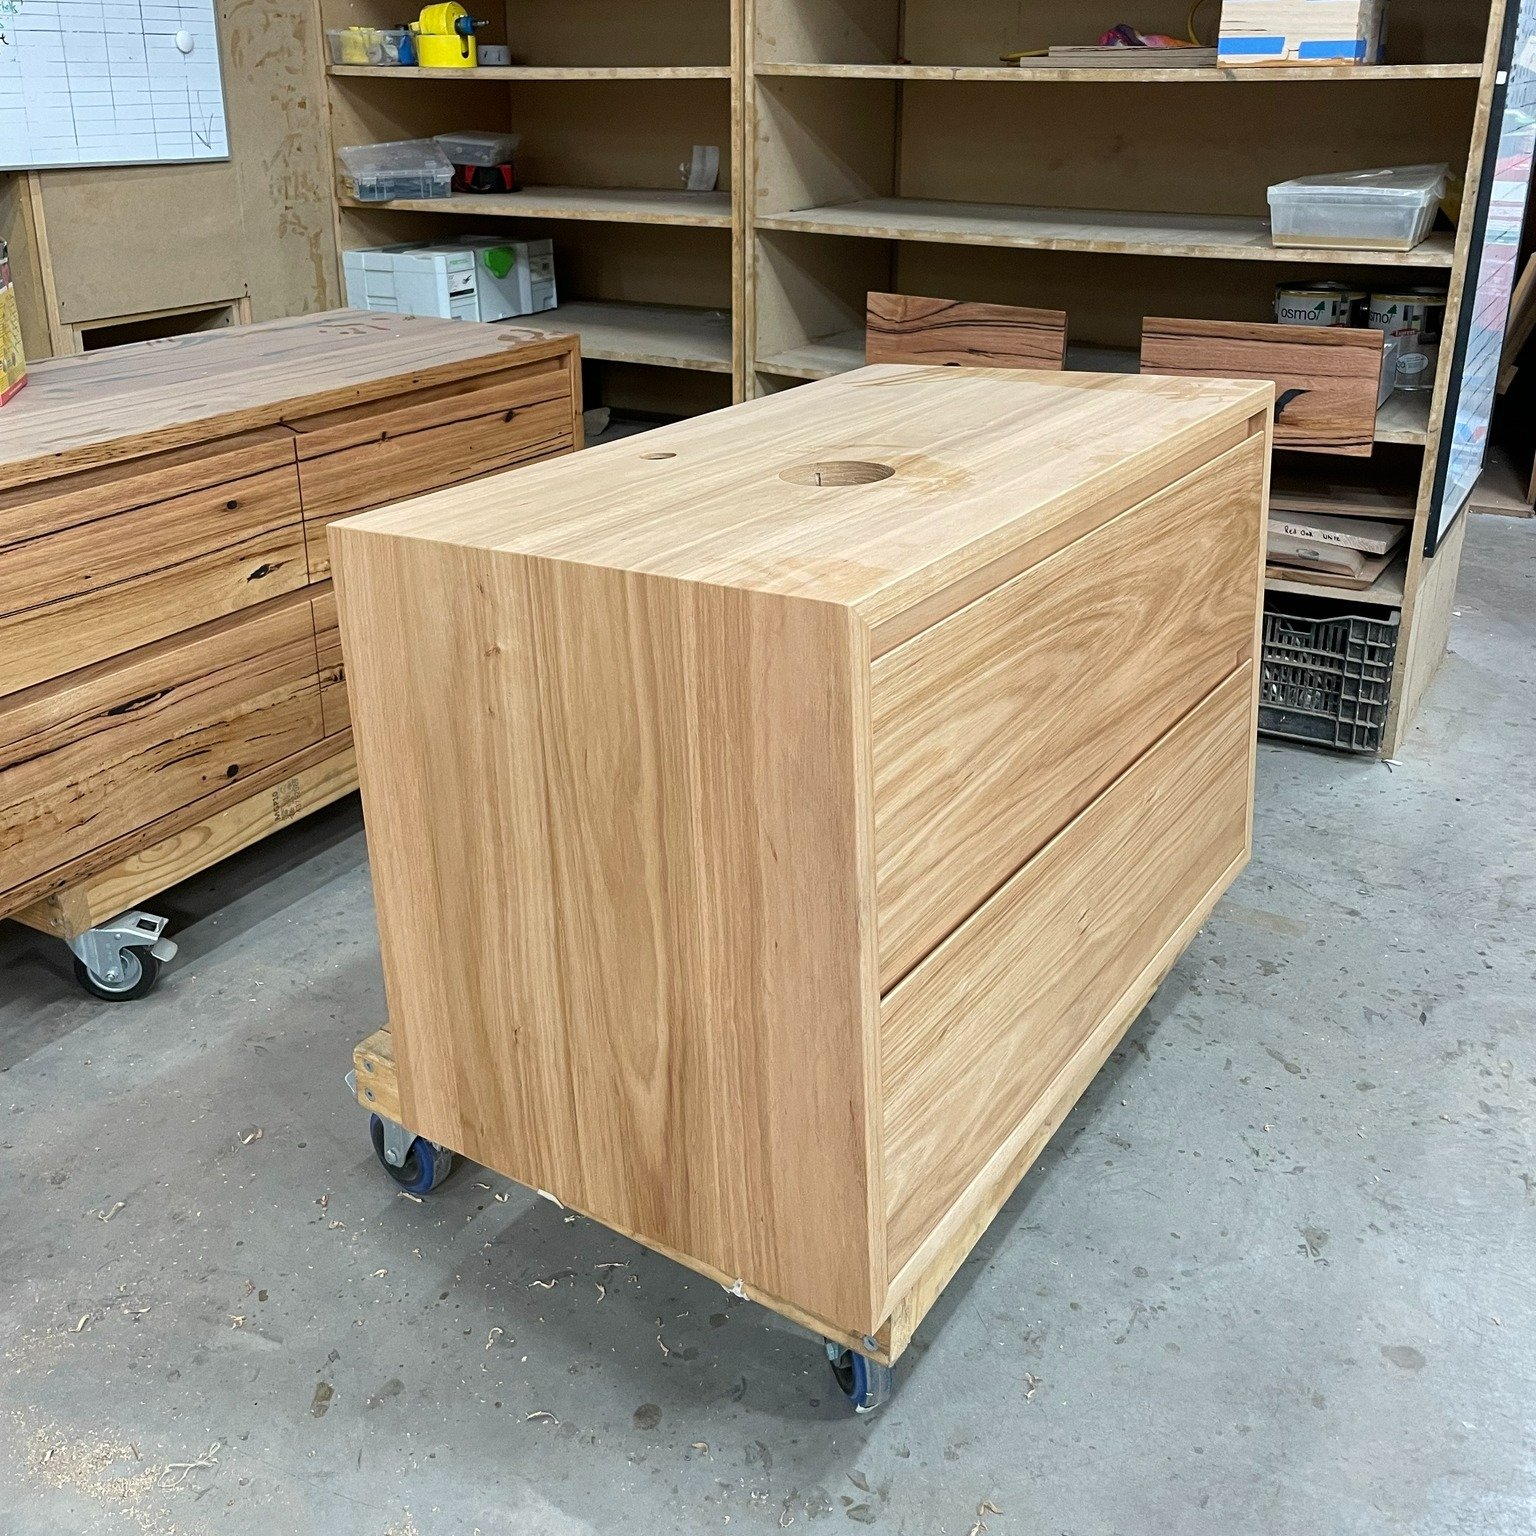 A beautiful compact Australian Chestnut timber vanity is all ready to head off to its new home minus the inescapable dust... the battle is real!

  #ilukavanity #bathroomdesign #furnituremaker